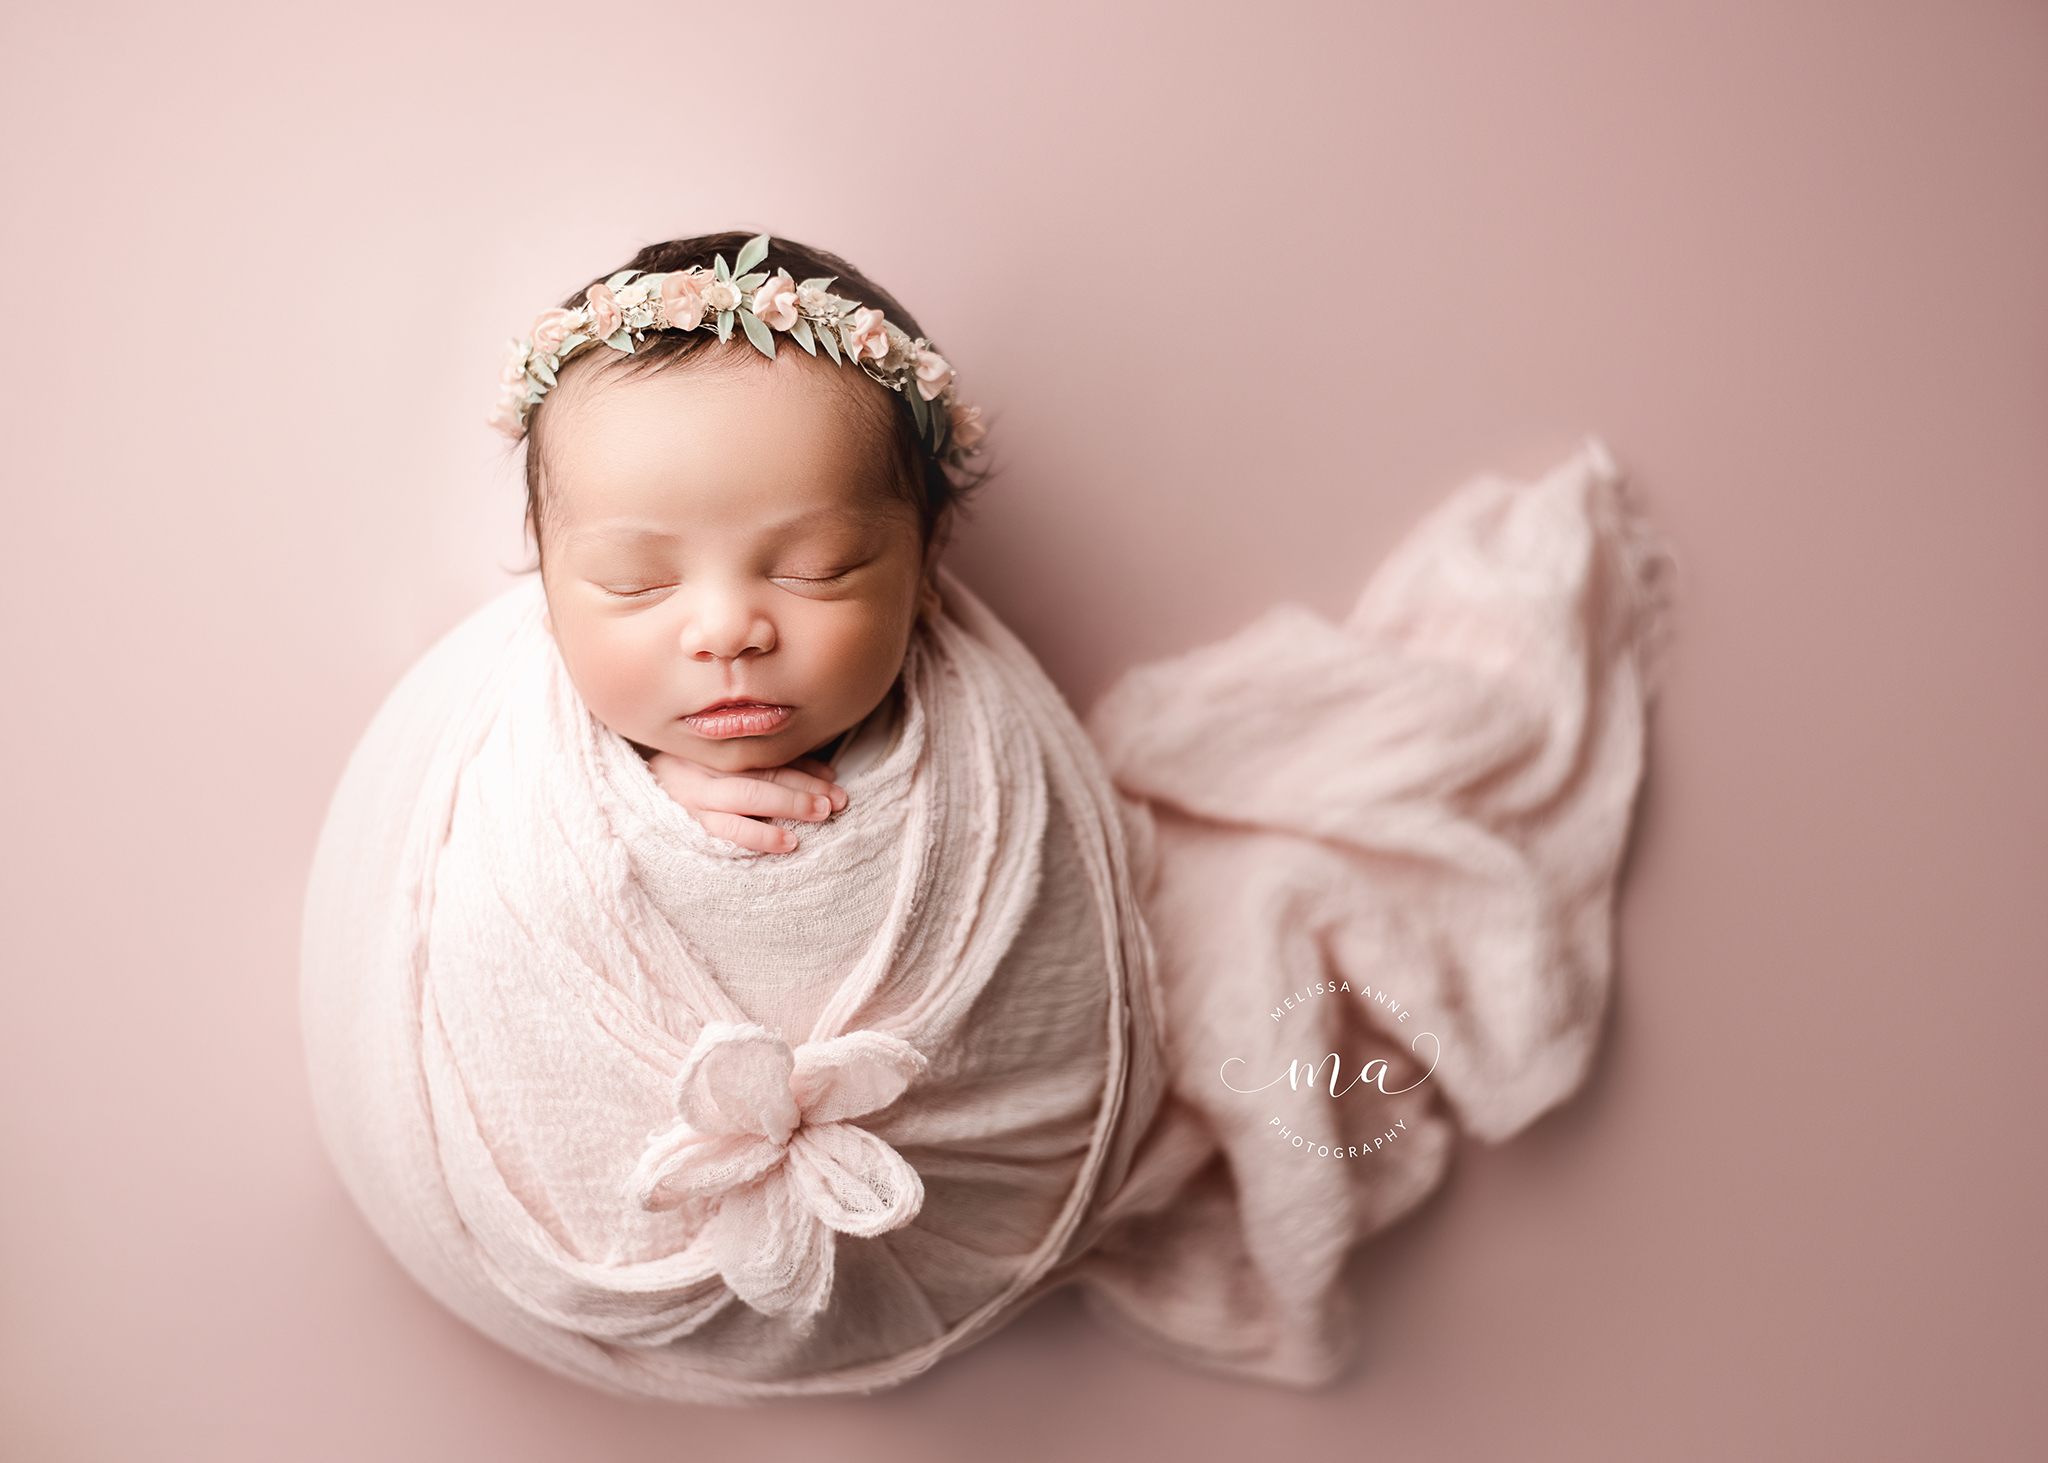 Kelly Temple Photography - This sweet baby girl rocked this pose. I love  how little and fresh she looks! This is why newborn photography is fun - we  capture a stage that